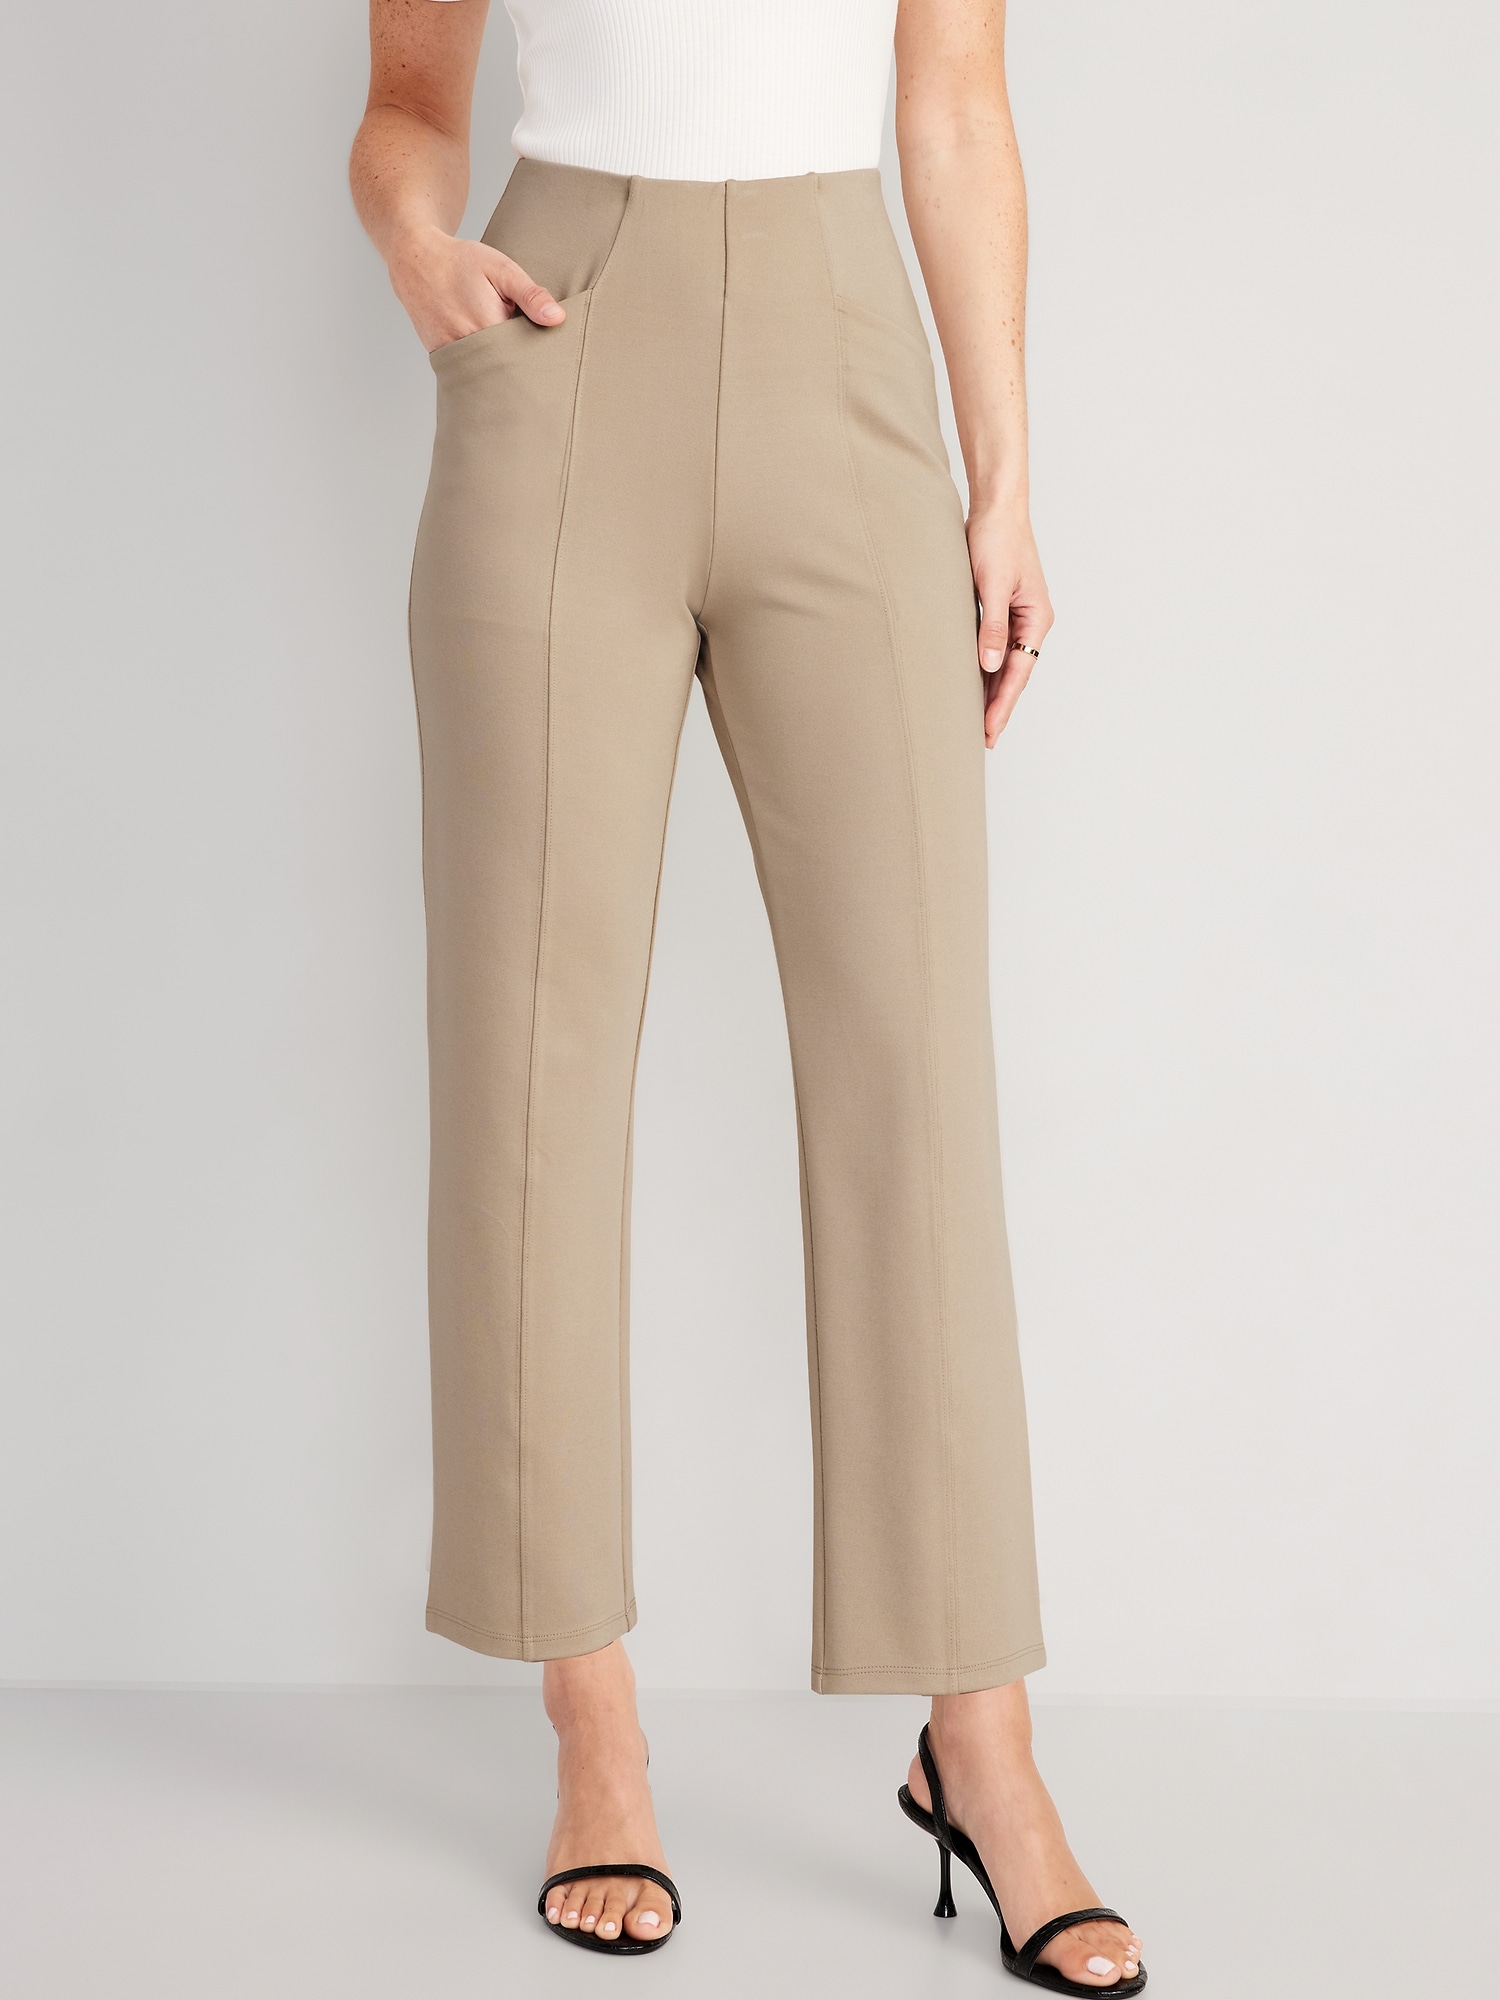 What are the disadvantages of wearing high waisted pants for women? - Quora